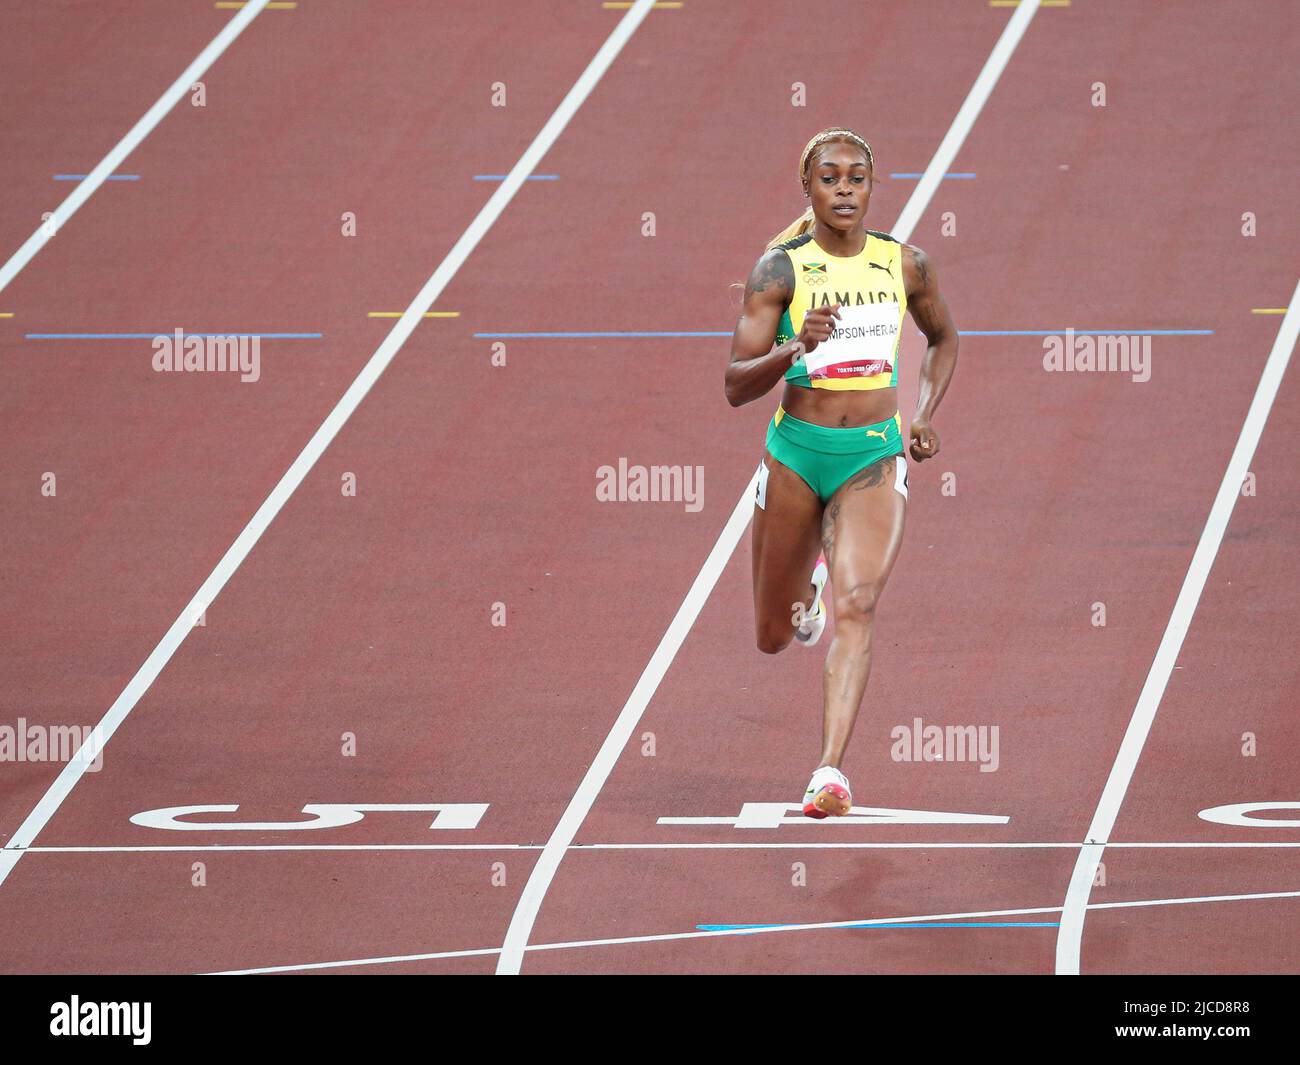 JULY 31st, 2021 - TOKYO, JAPAN: Elaine Thompson-Herah of Jamaica in action during the Women's 100m Semi-Finals at the Tokyo 2020 Olympic Games (Photo: Stock Photo